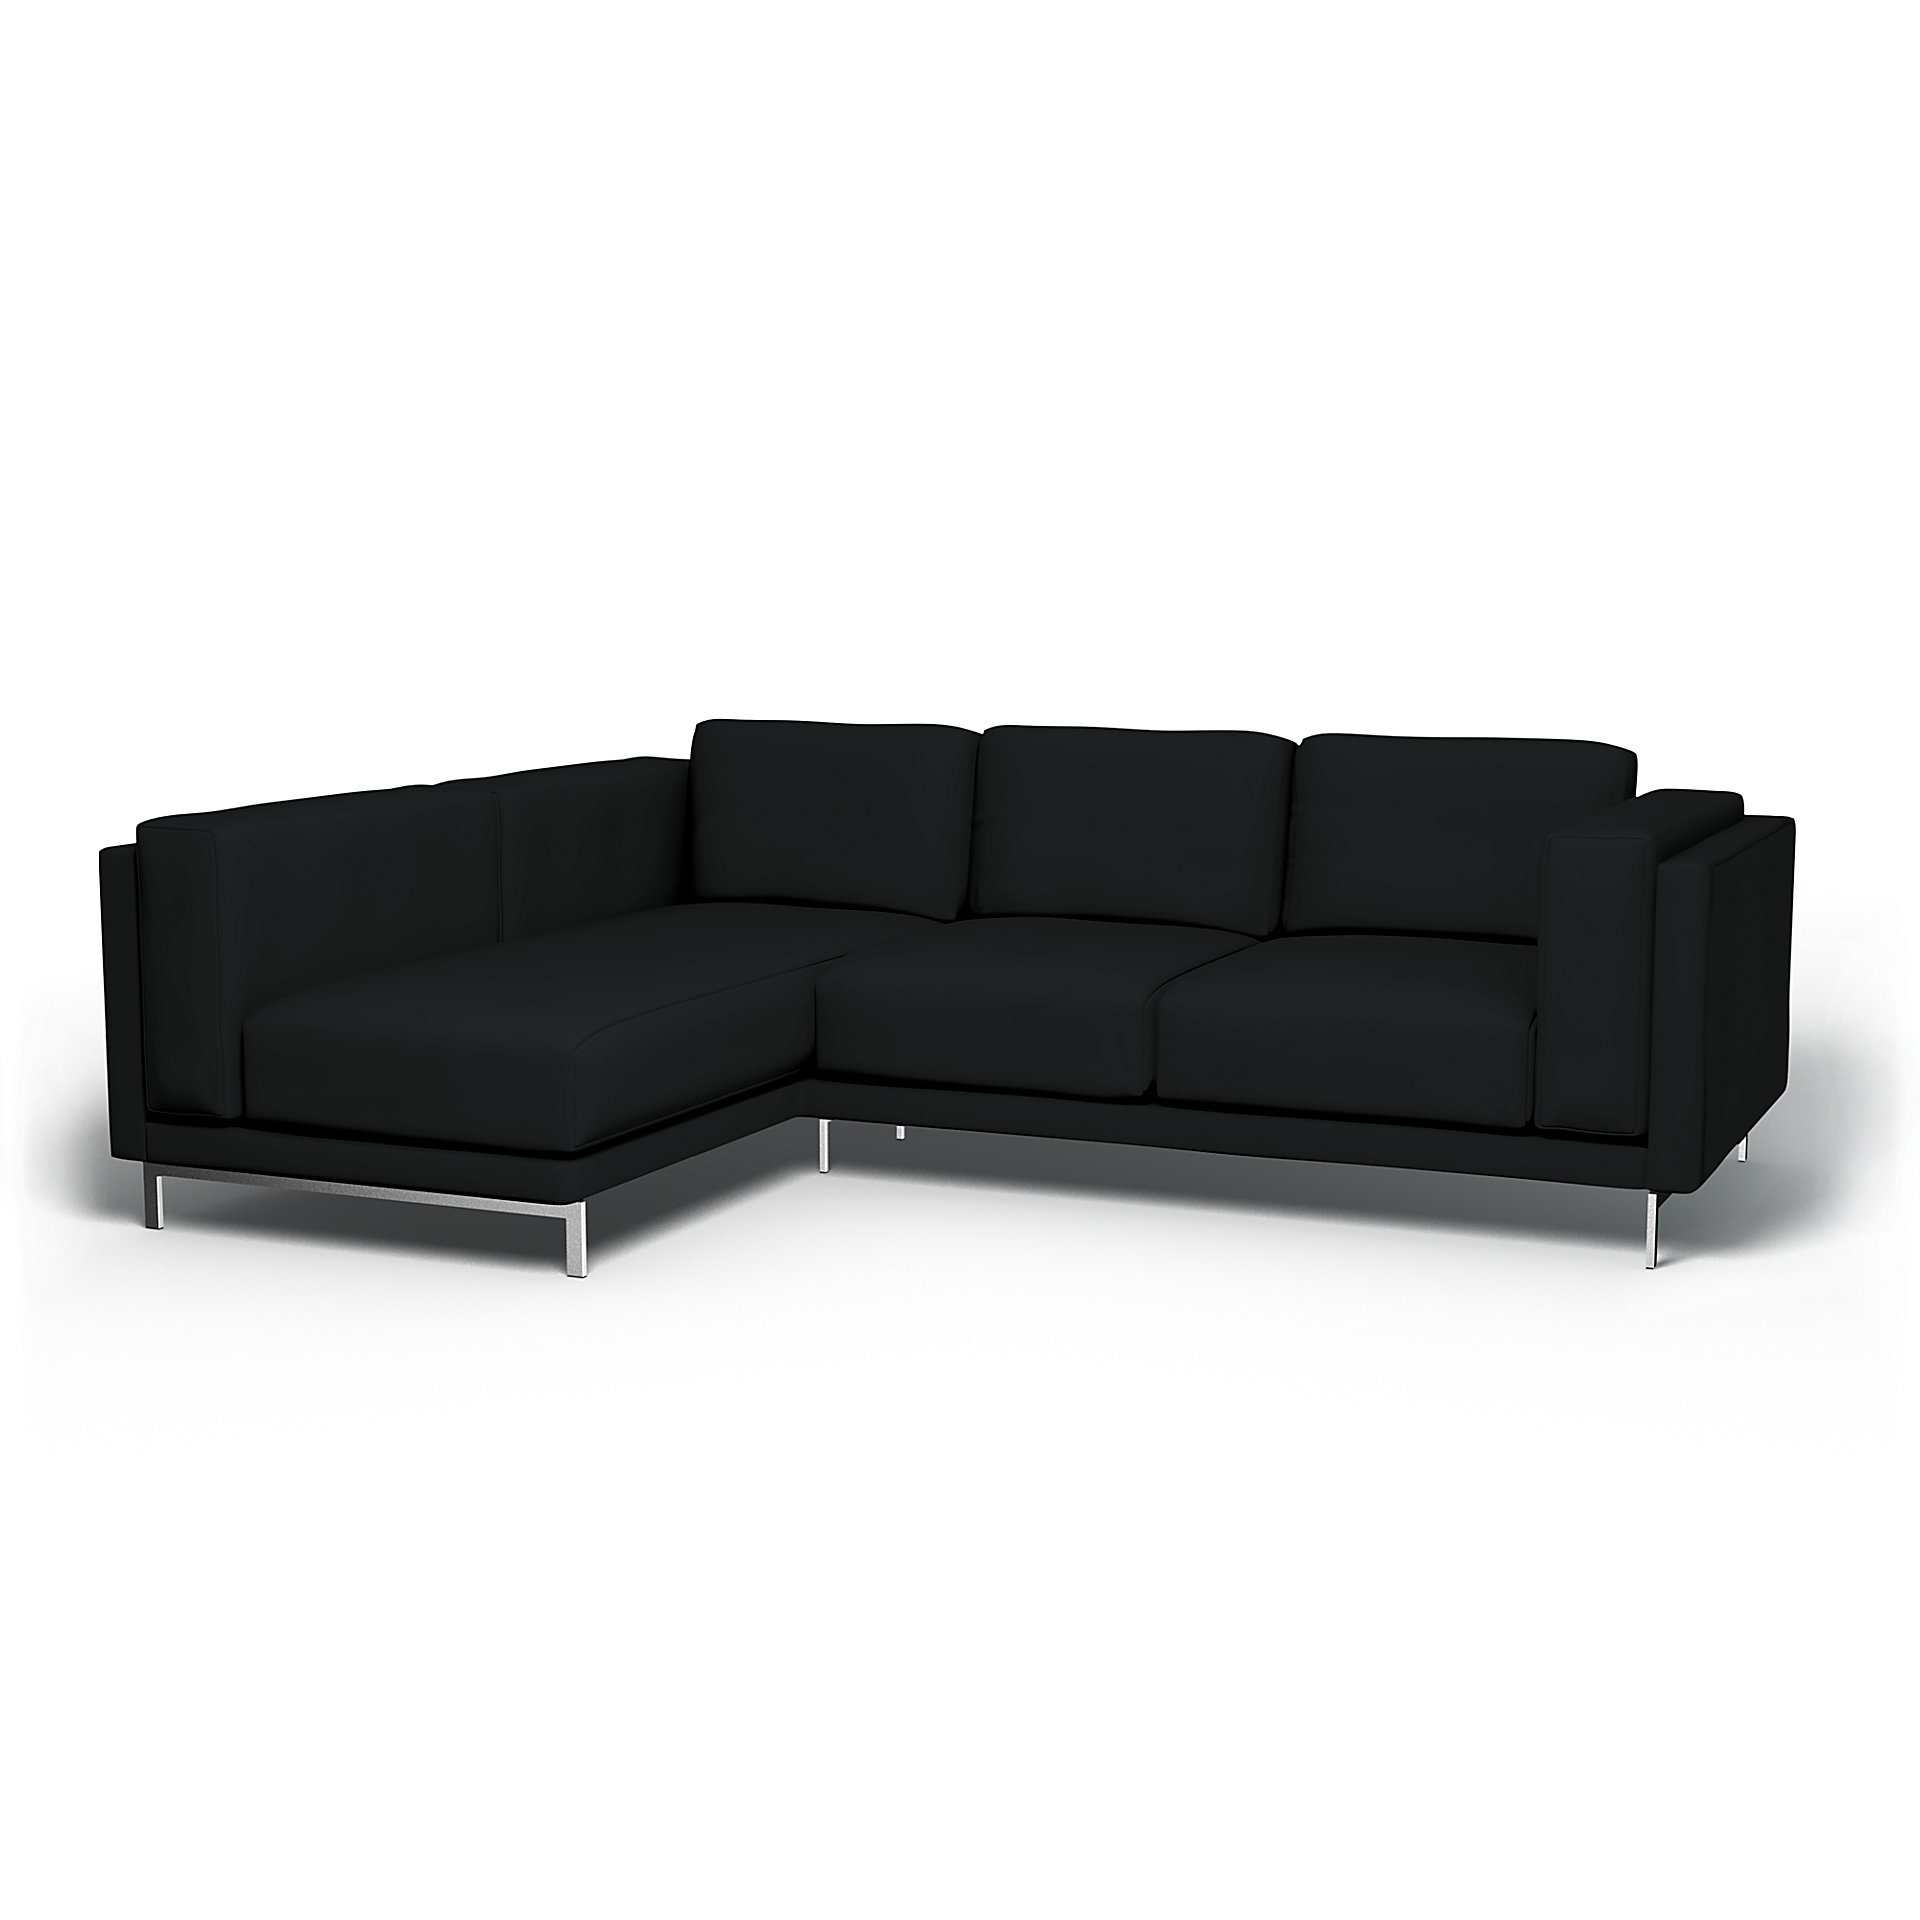 IKEA - Nockeby 3 Seater Sofa with Left Chaise Cover, Jet Black, Cotton - Bemz